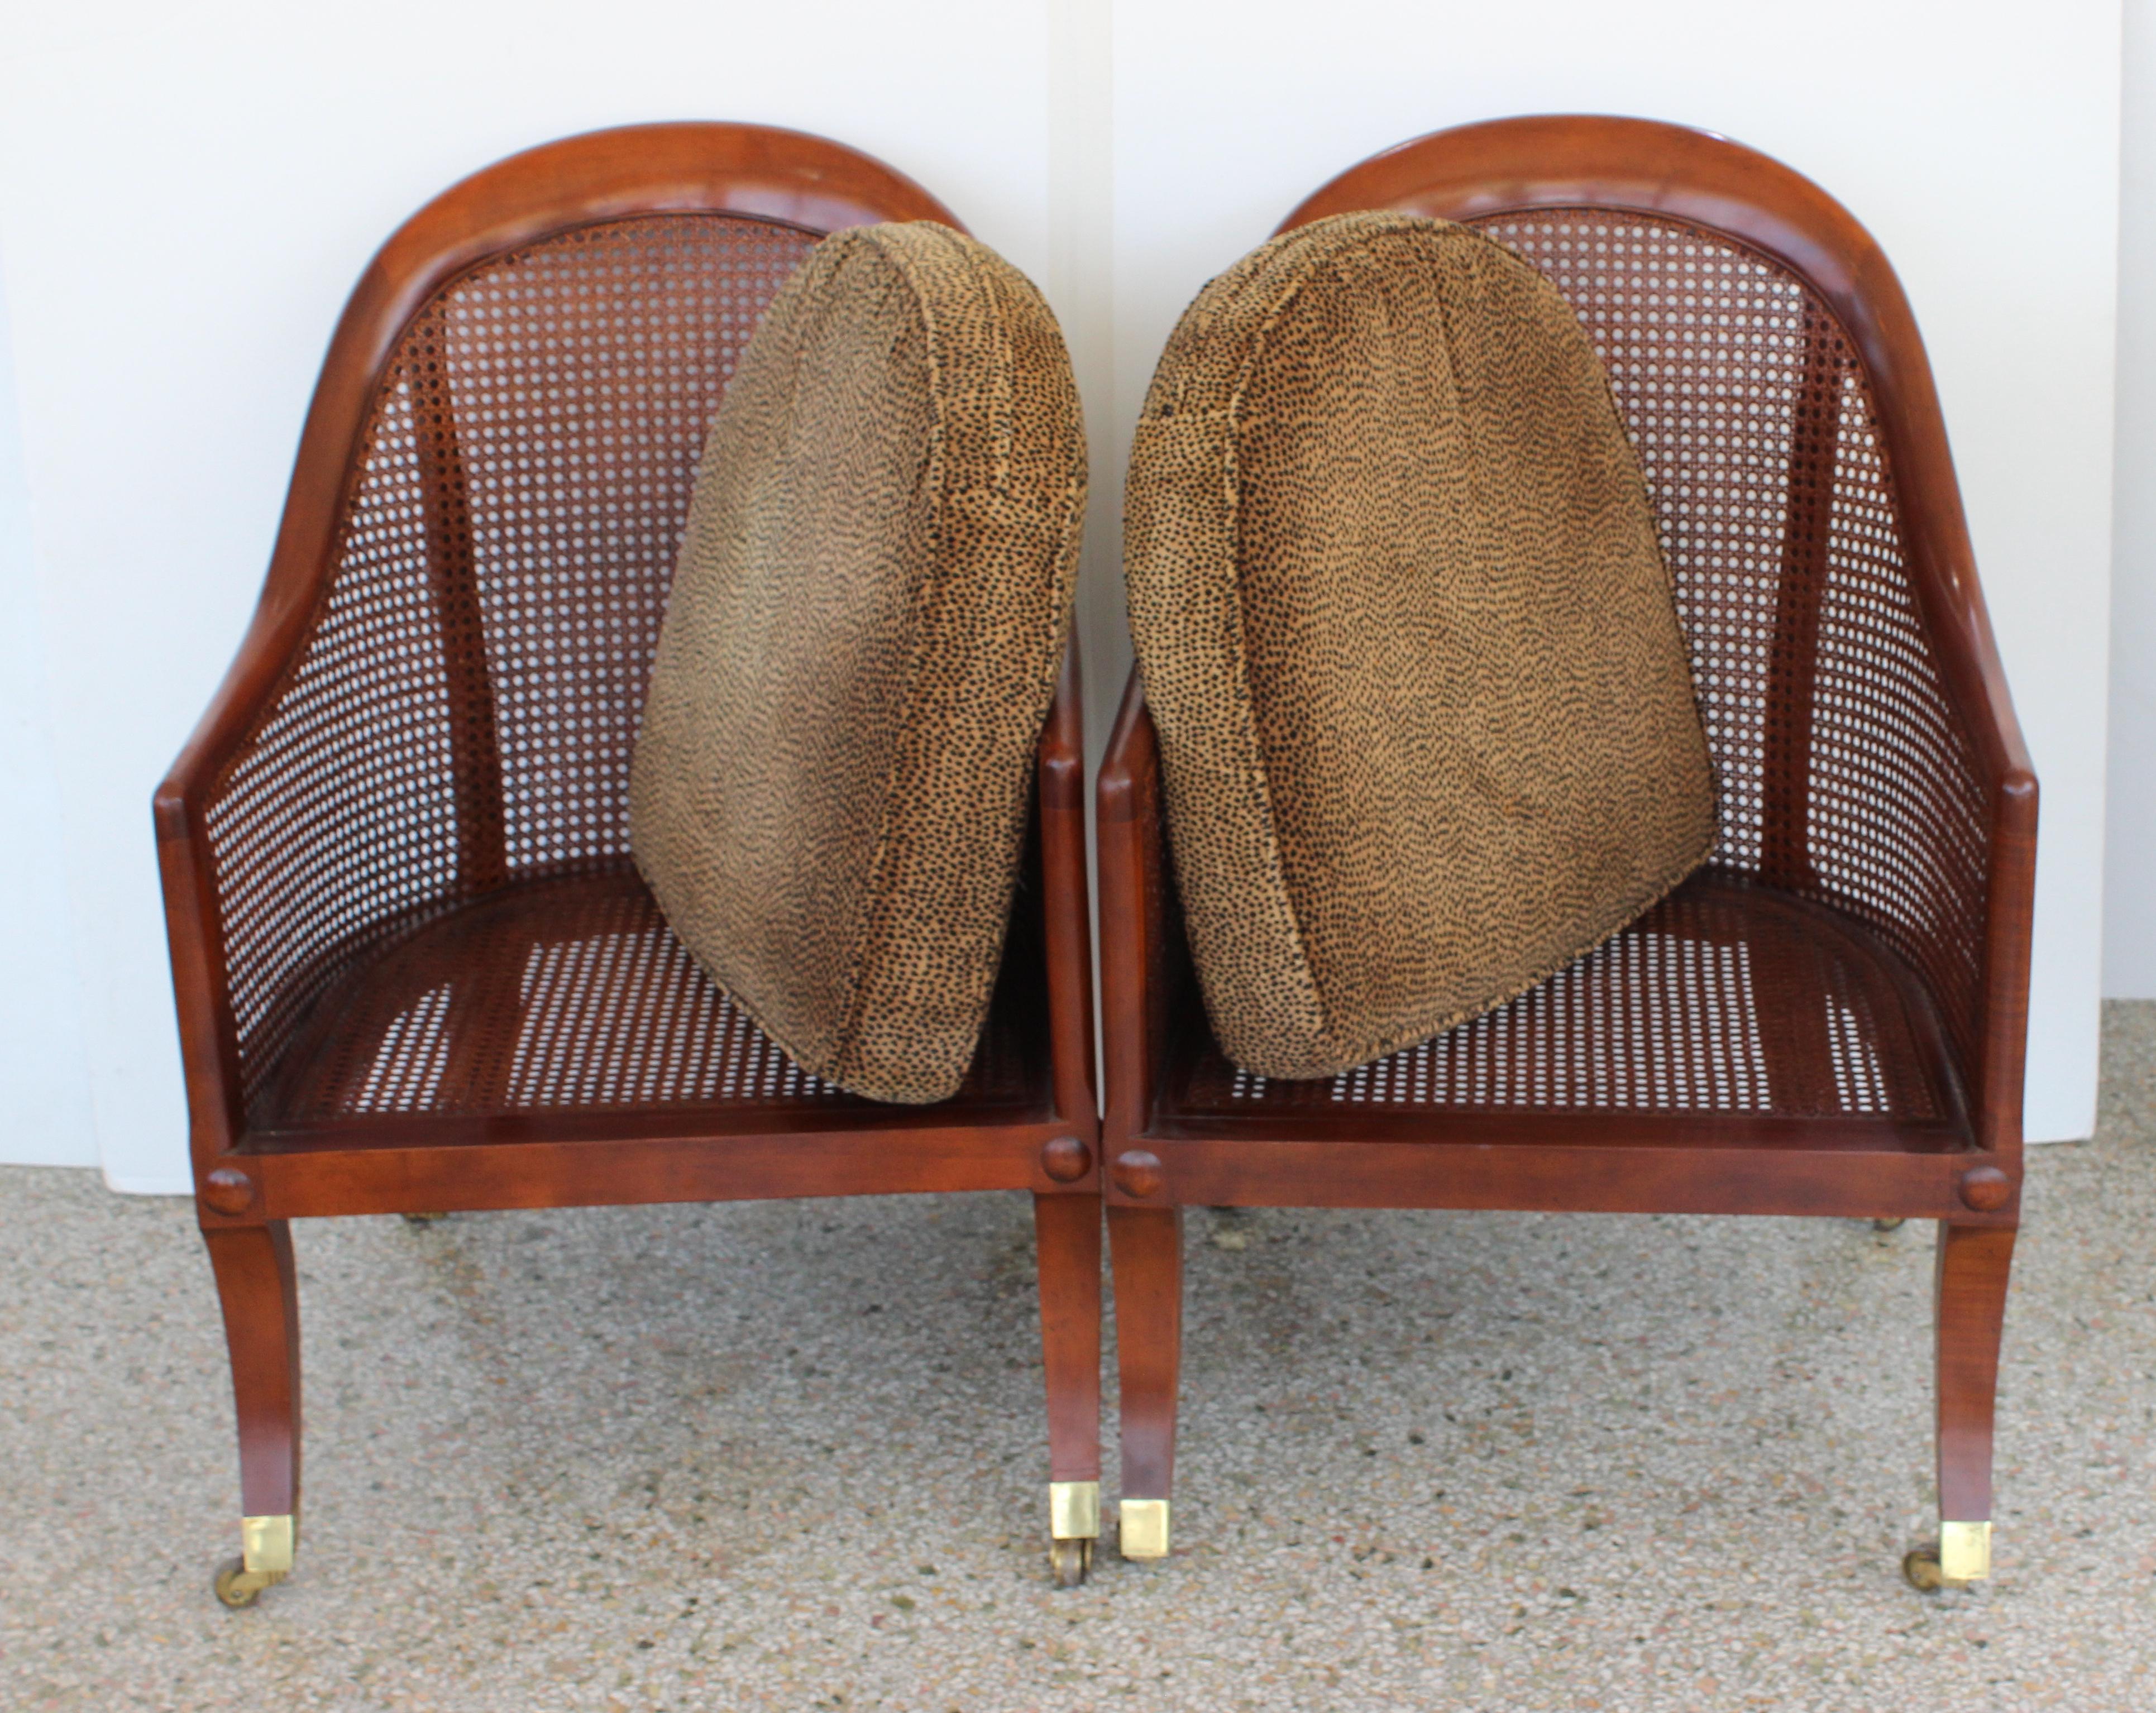 Pair of Regency Style Chairs by Baker In Good Condition For Sale In West Palm Beach, FL